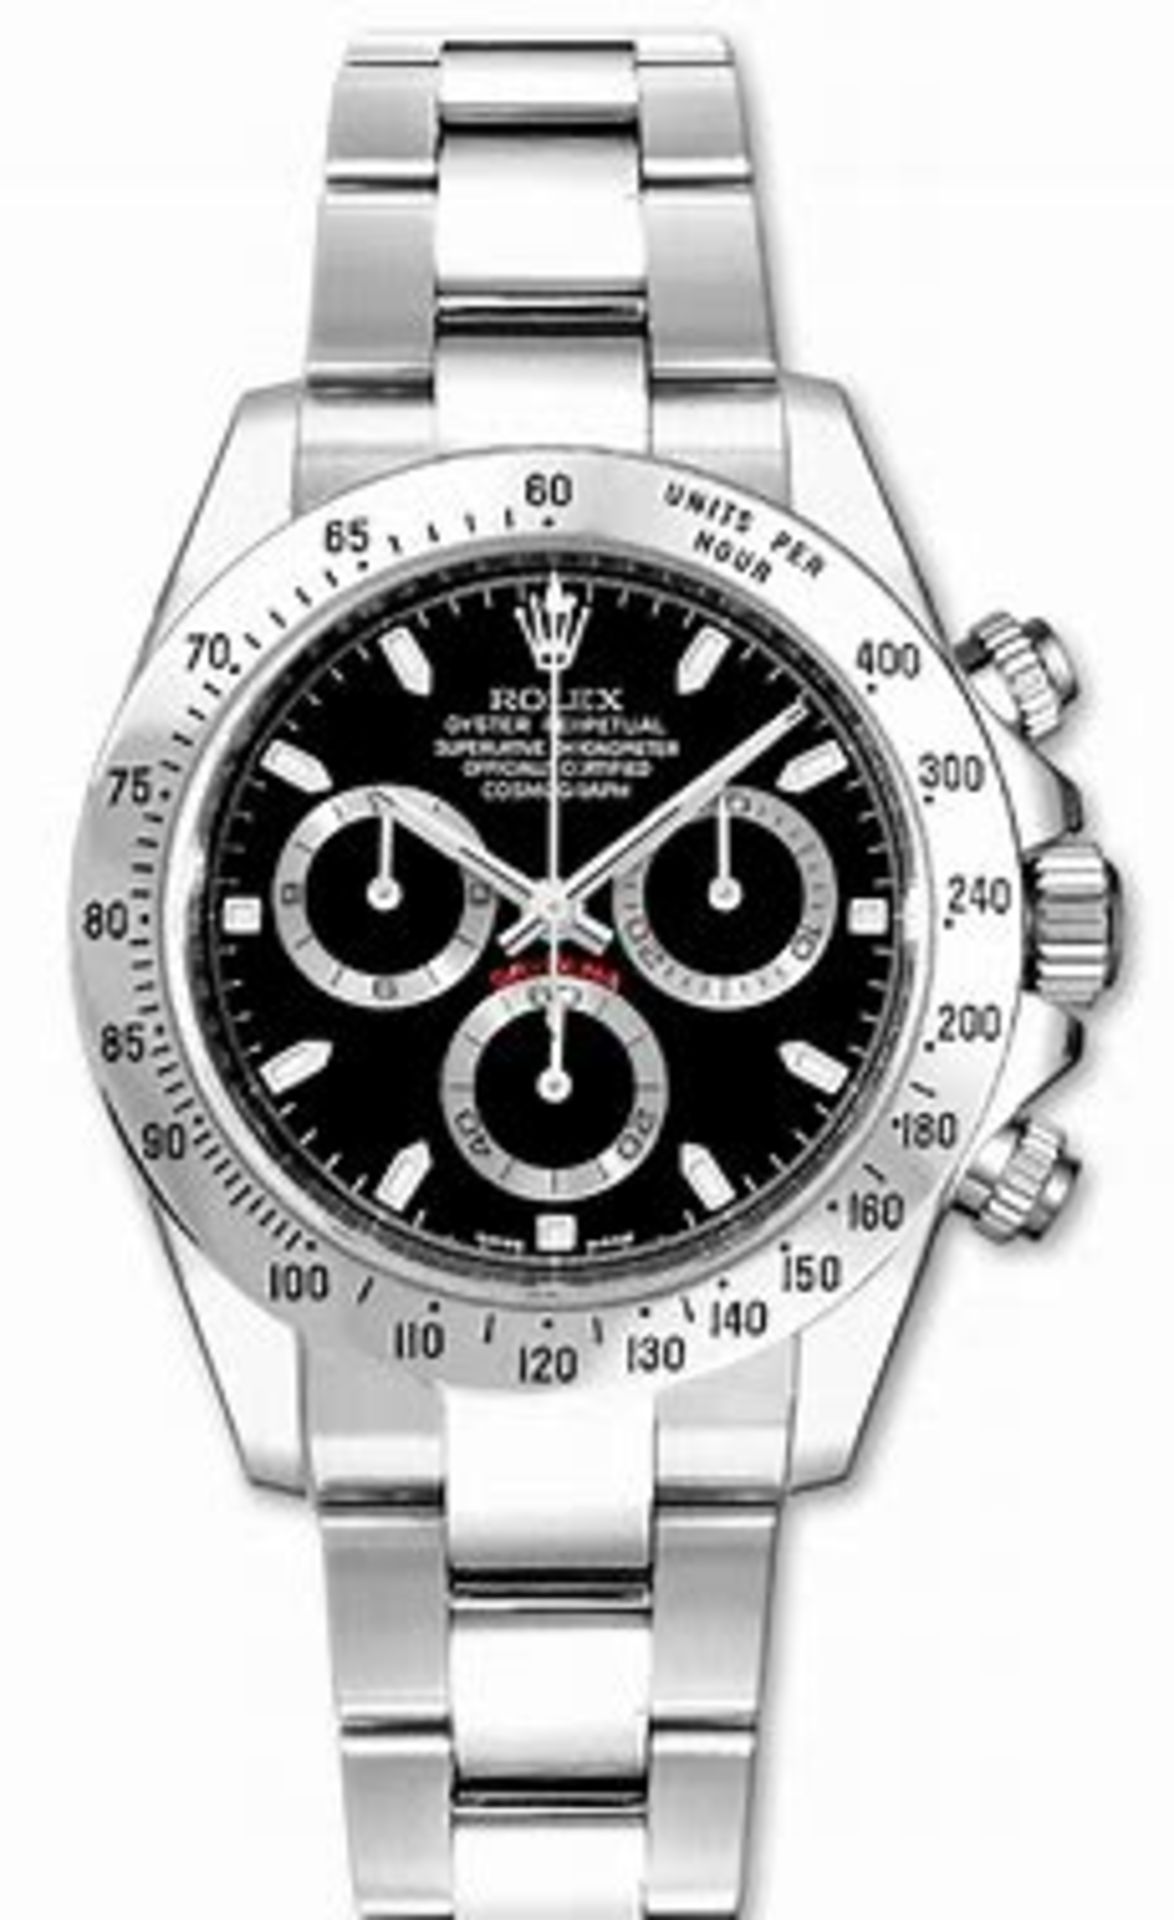 Gents Rolex Daytona Wrist Watch, With Box And Original Papers - Image 5 of 9